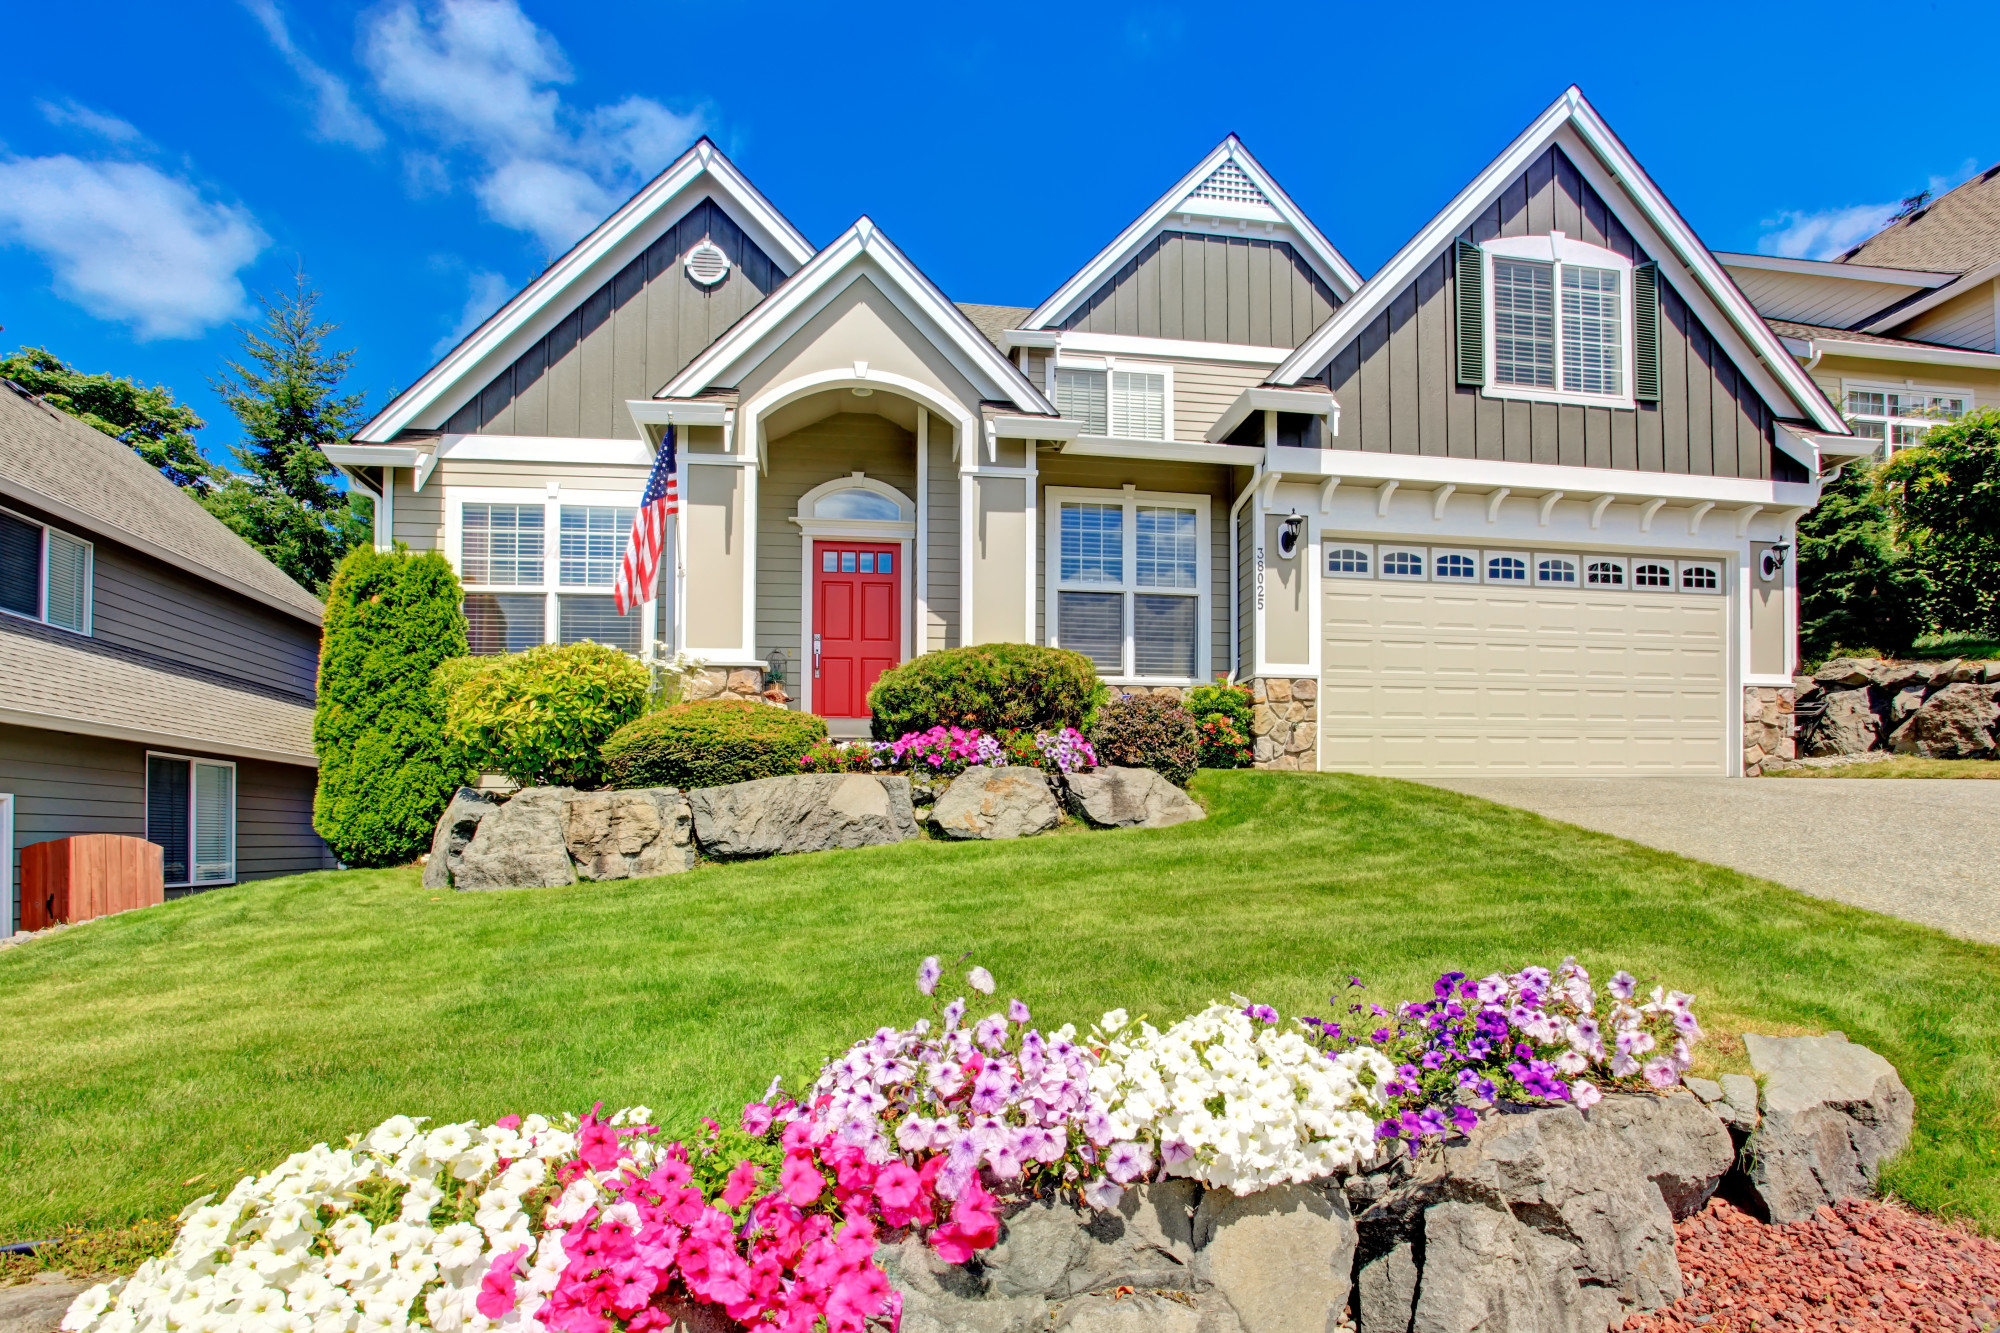 There are several advantages of hiring professional landscapers for your home, but how much does landscaping cost? These are the average prices.